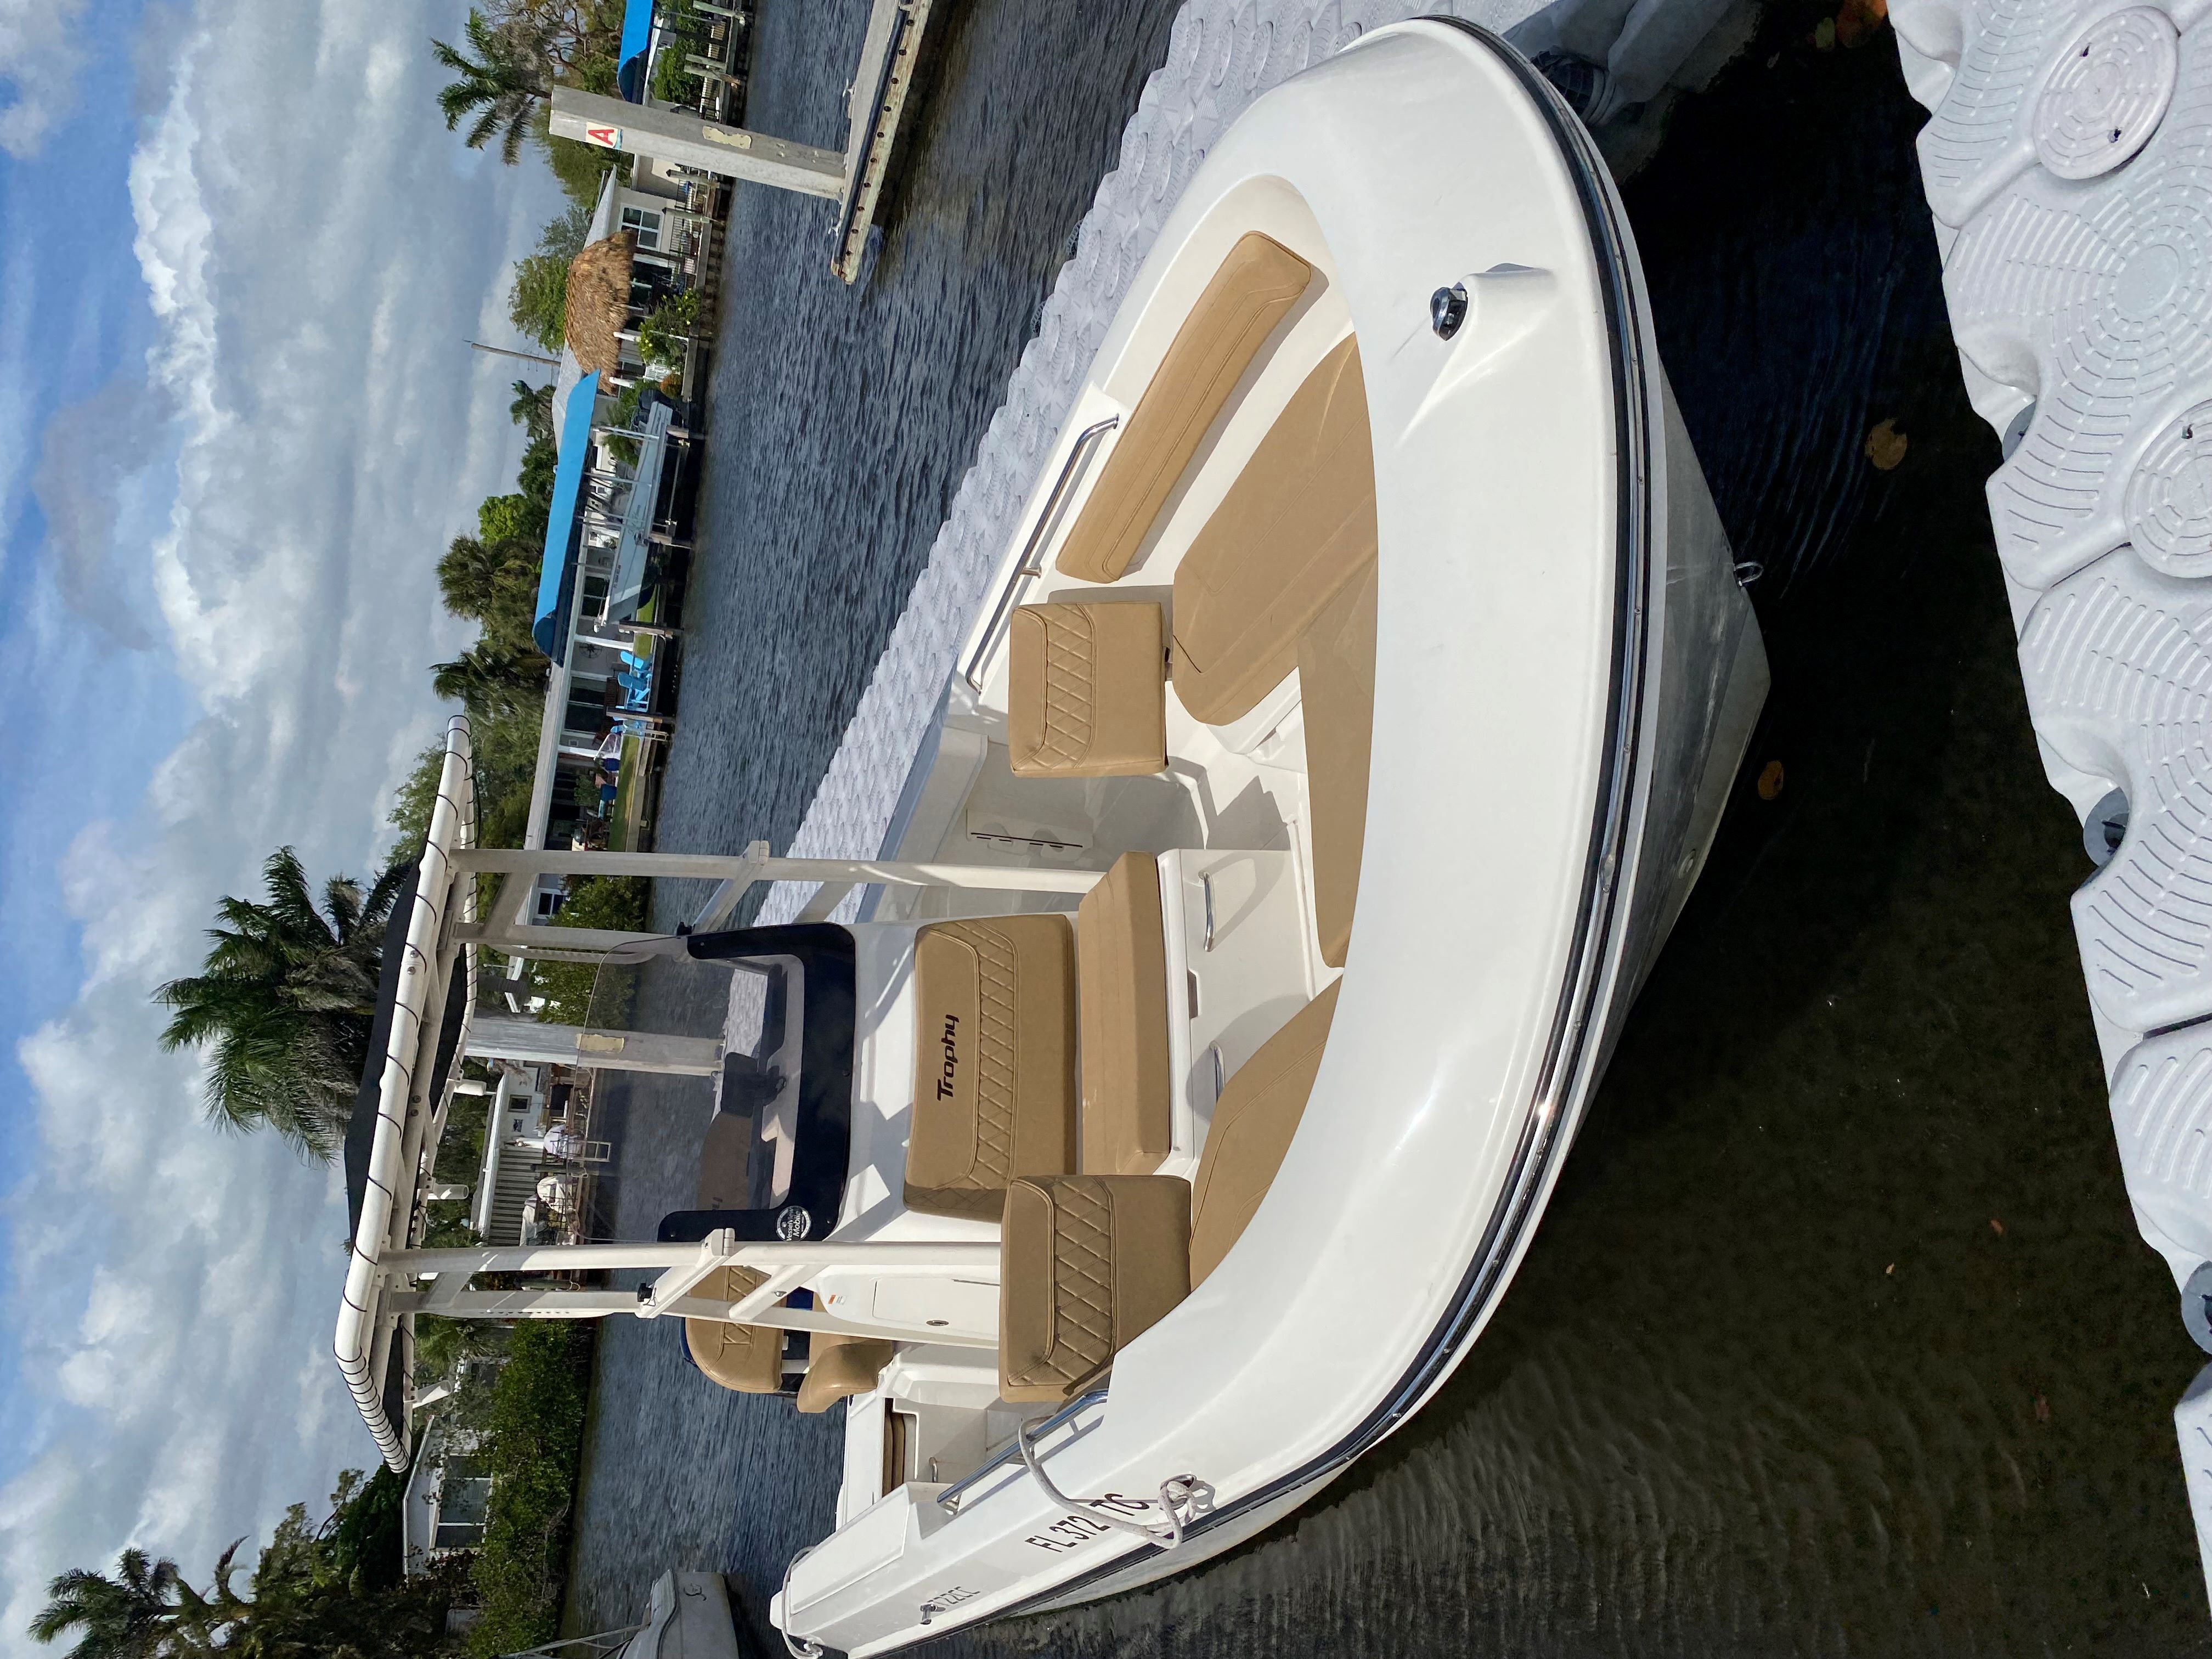 YEAH BUOY (22FT Bayliner Trophy 22 Center Console - 150 HP~Fishing)